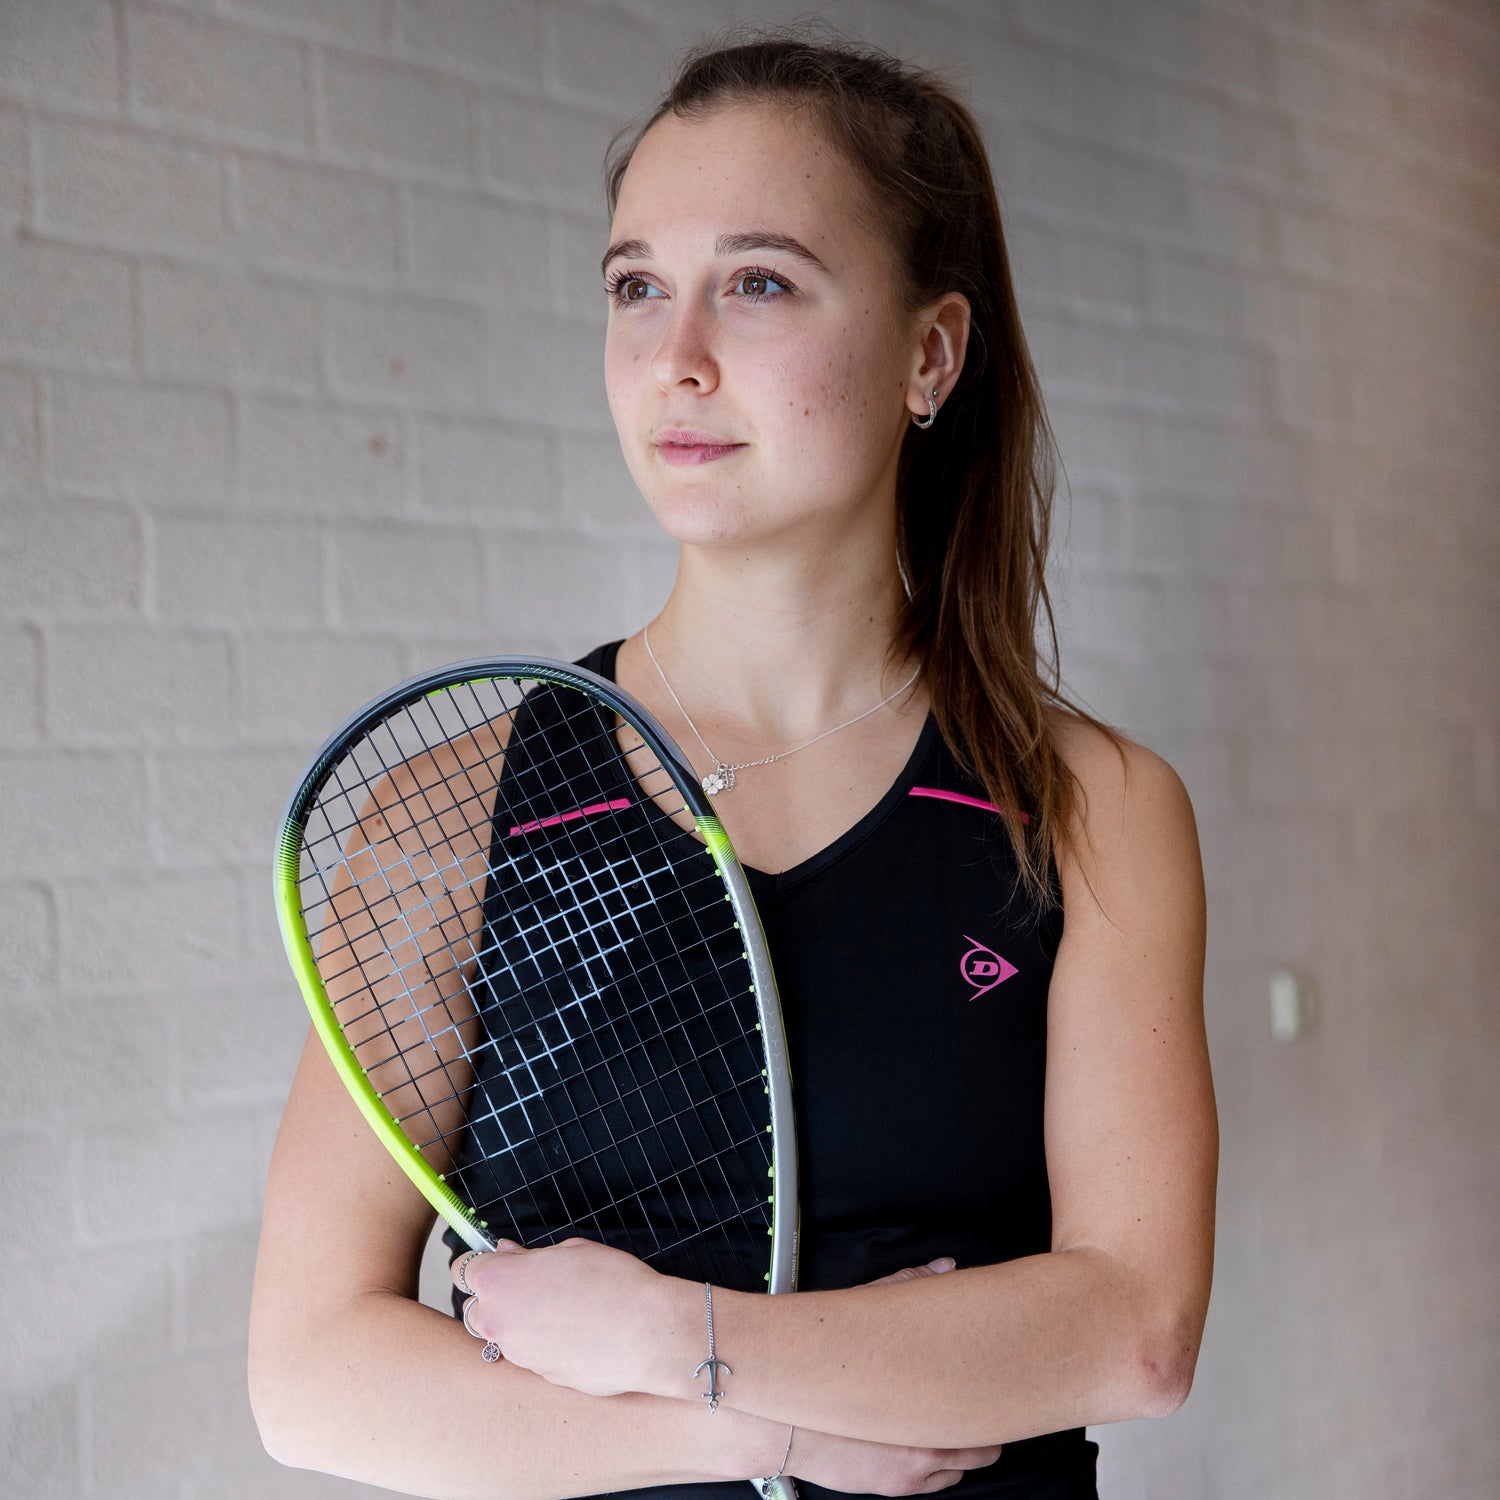 Tinne Gilis PSA Squash Professional Player Signs with Dunlop